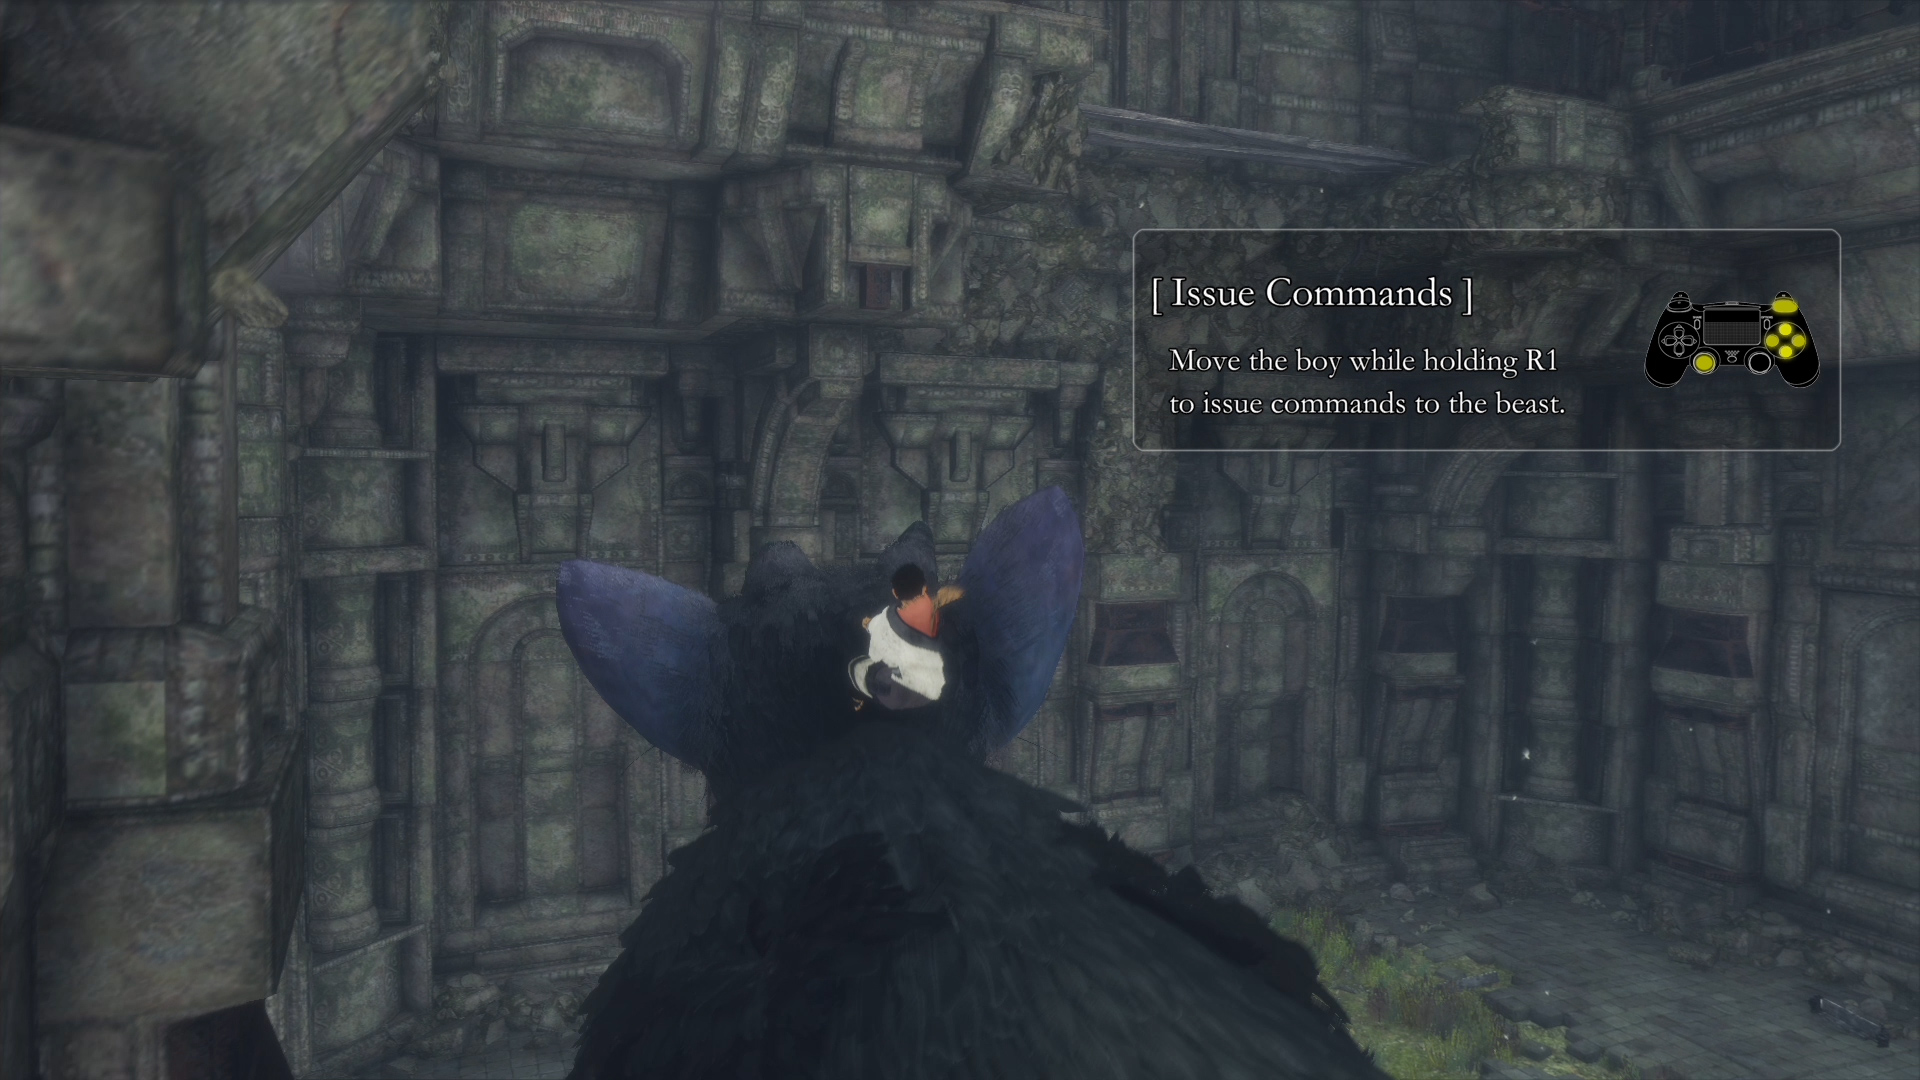 The Last Guardian review: 5 reasons you need to play it